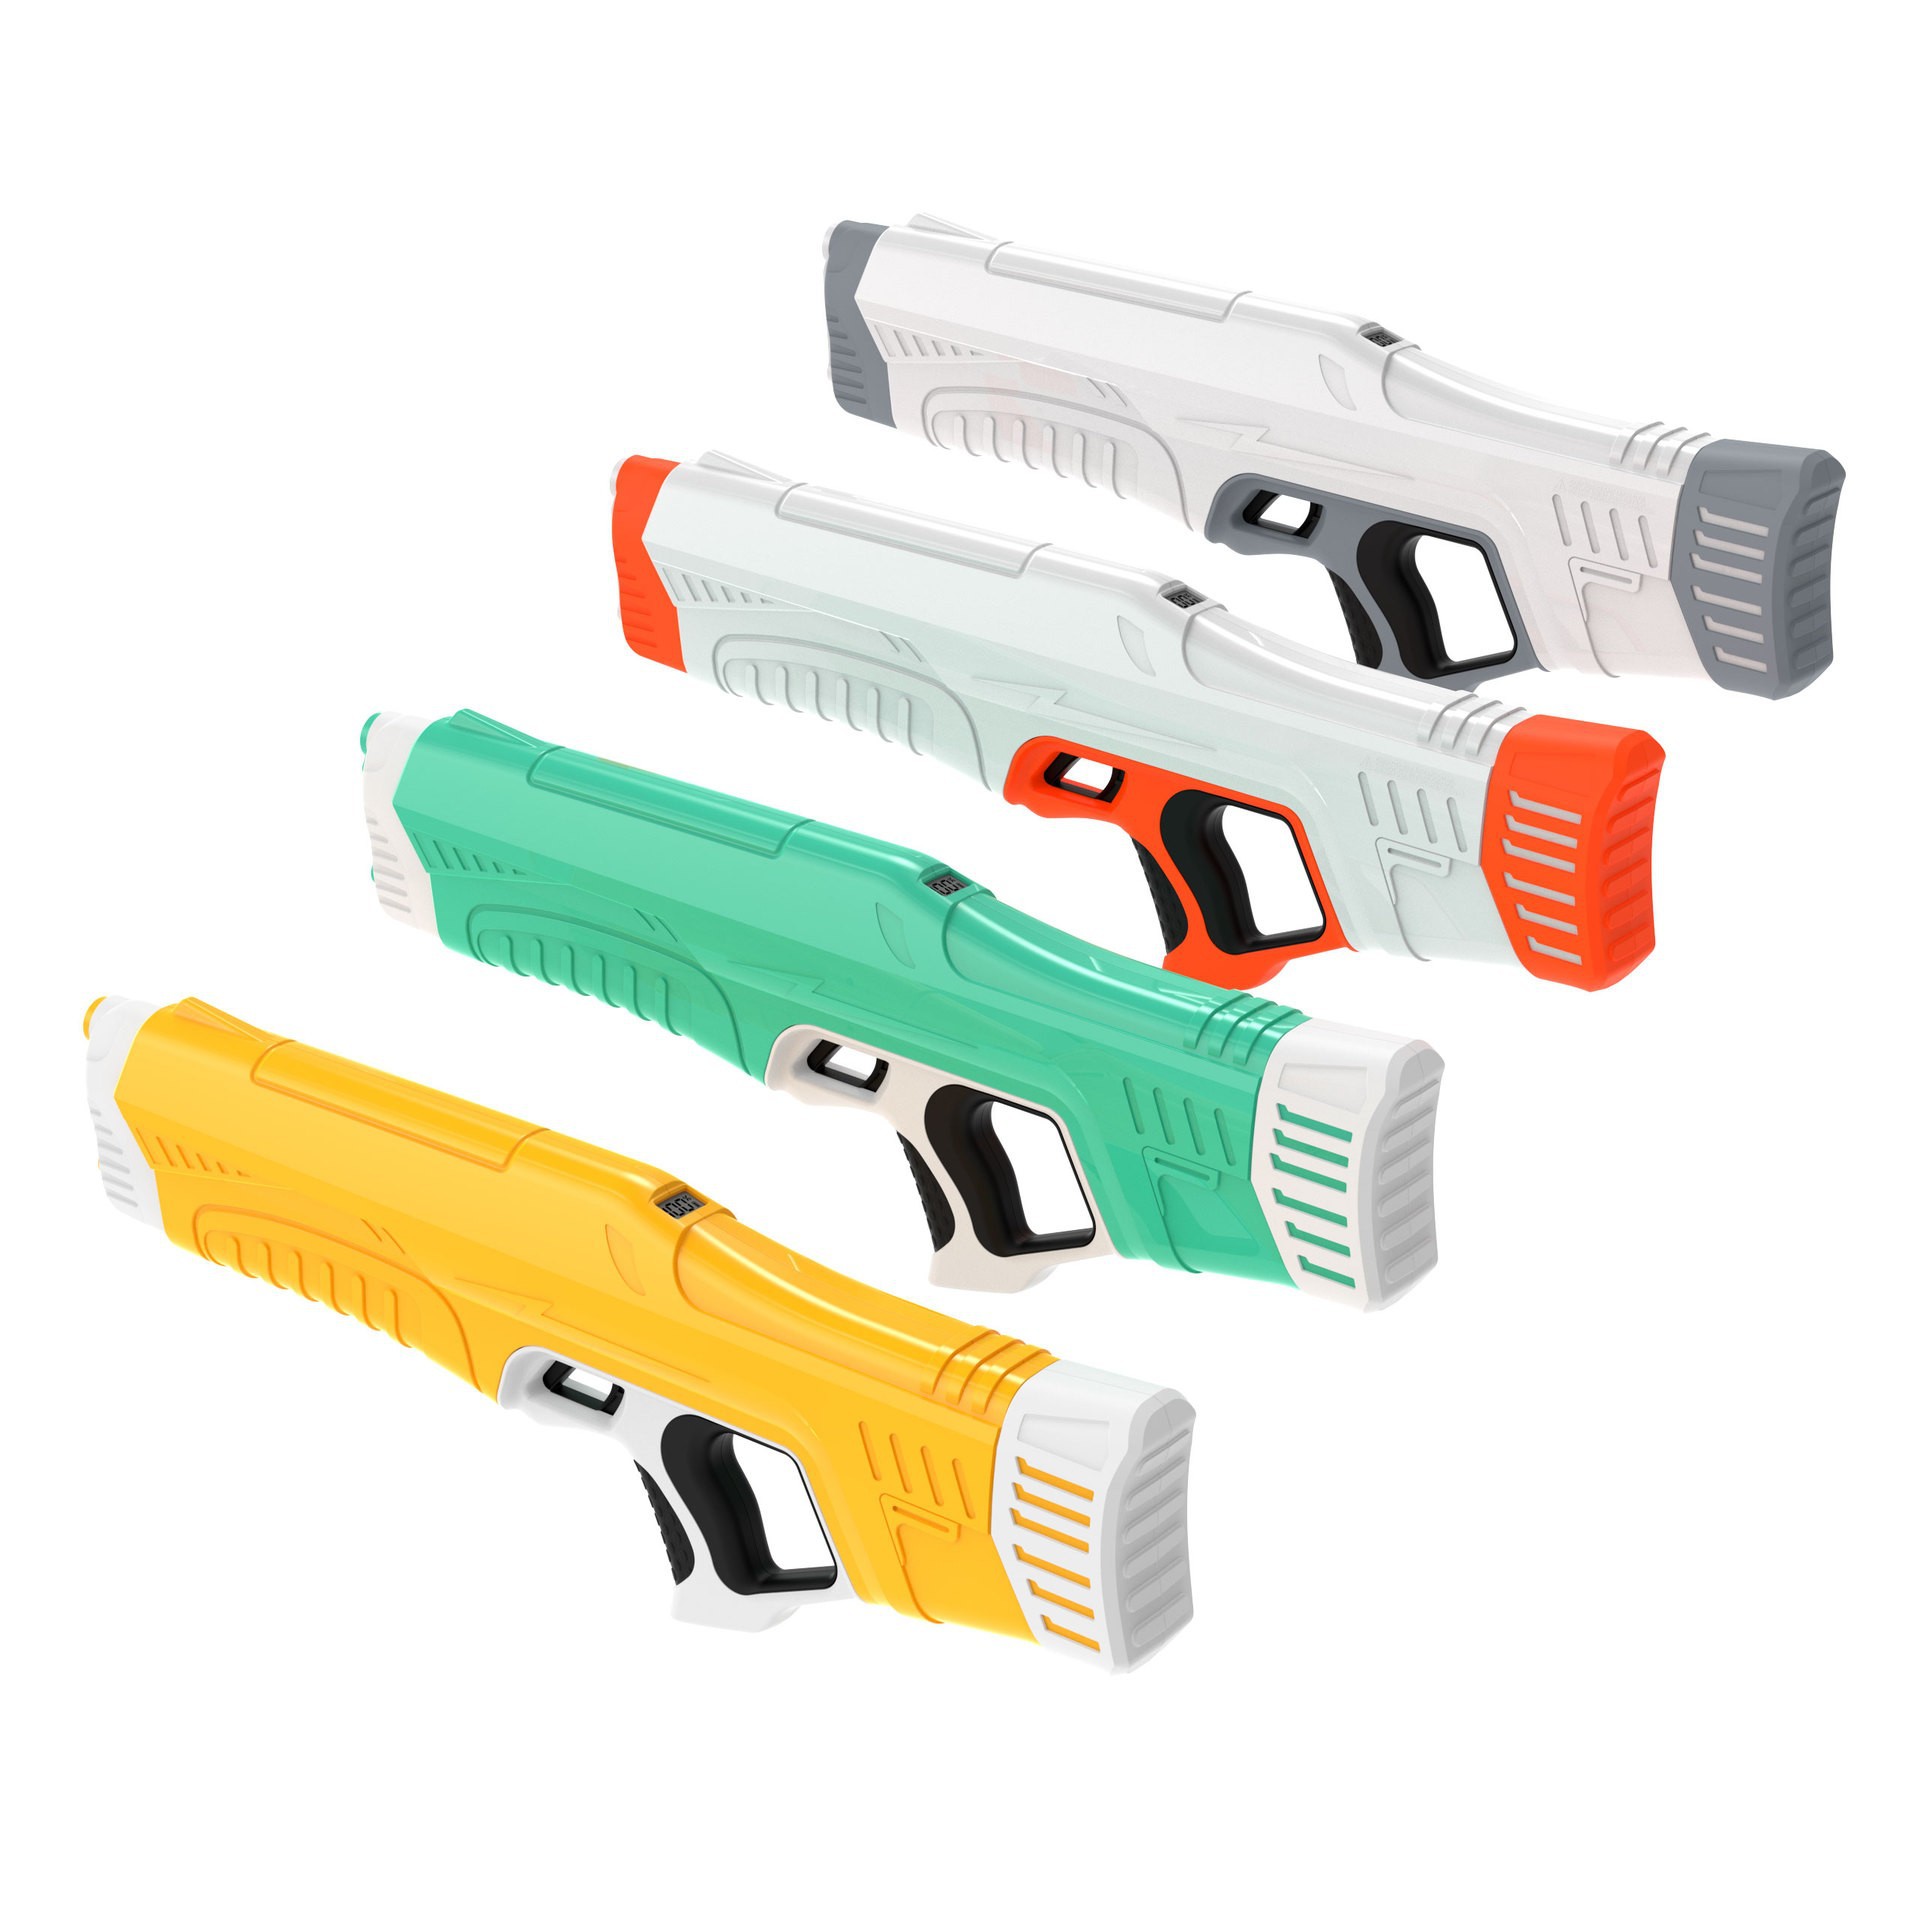 Spyra One Water Gun, The next generation of water guns. by Spyra, SpyraLX Outdoor Water Toys, Spyra Two Water Squirting Toys.